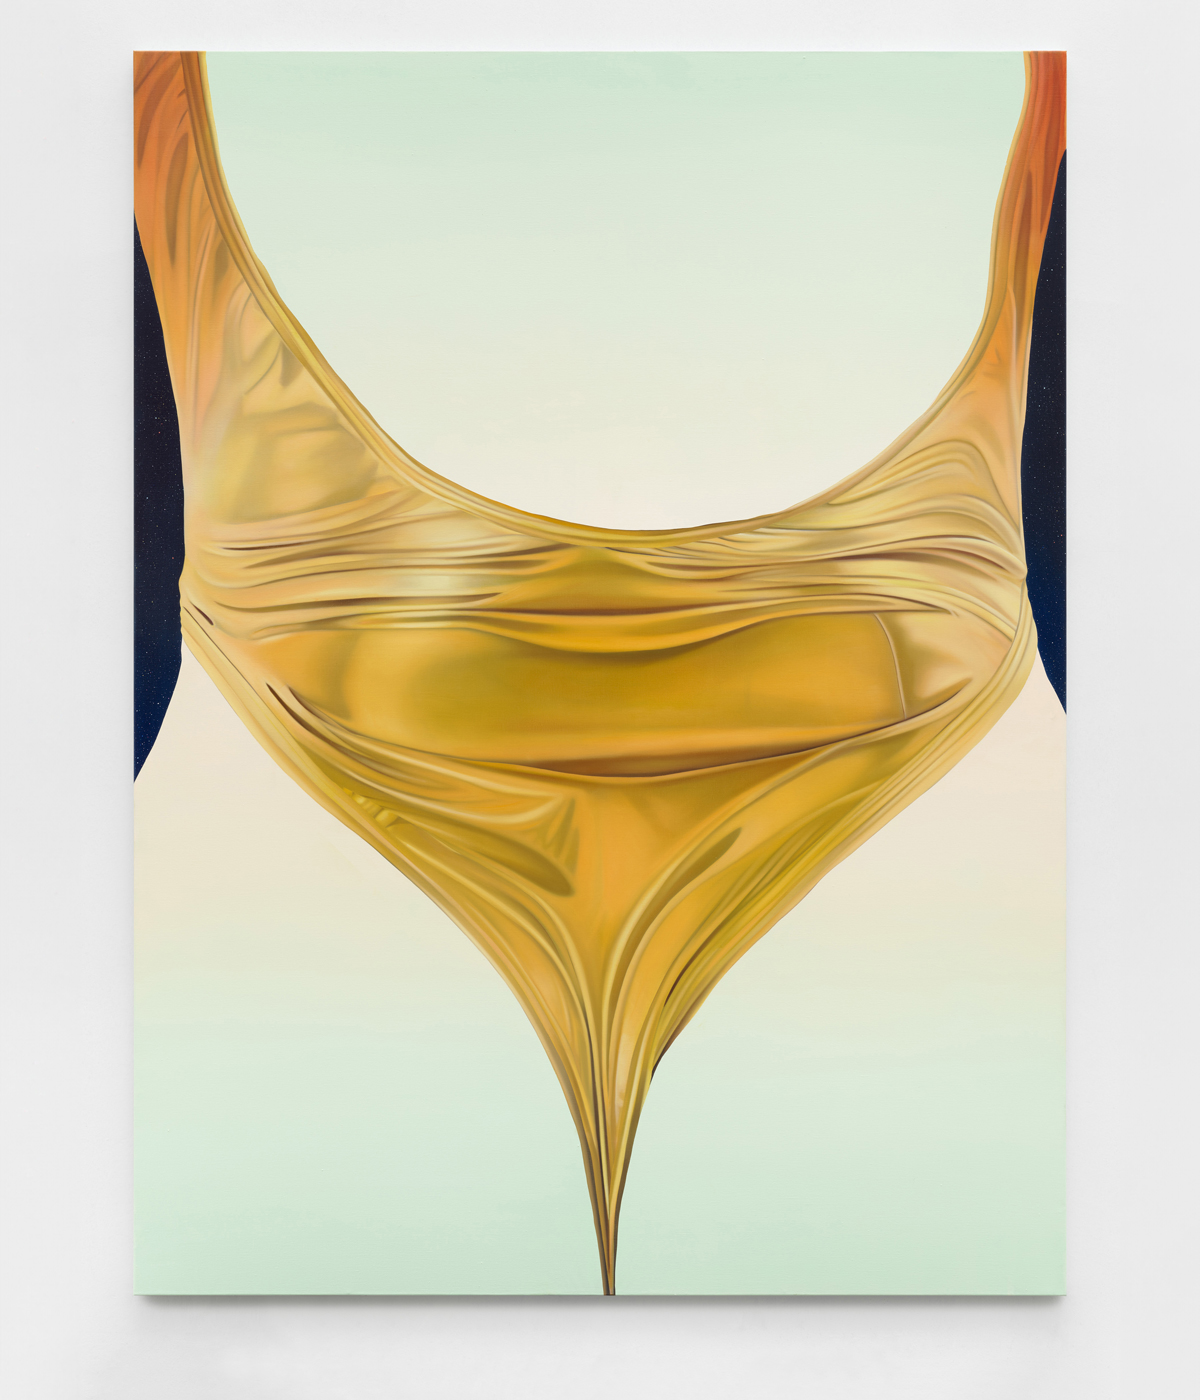 Abstract artwork resembling female form